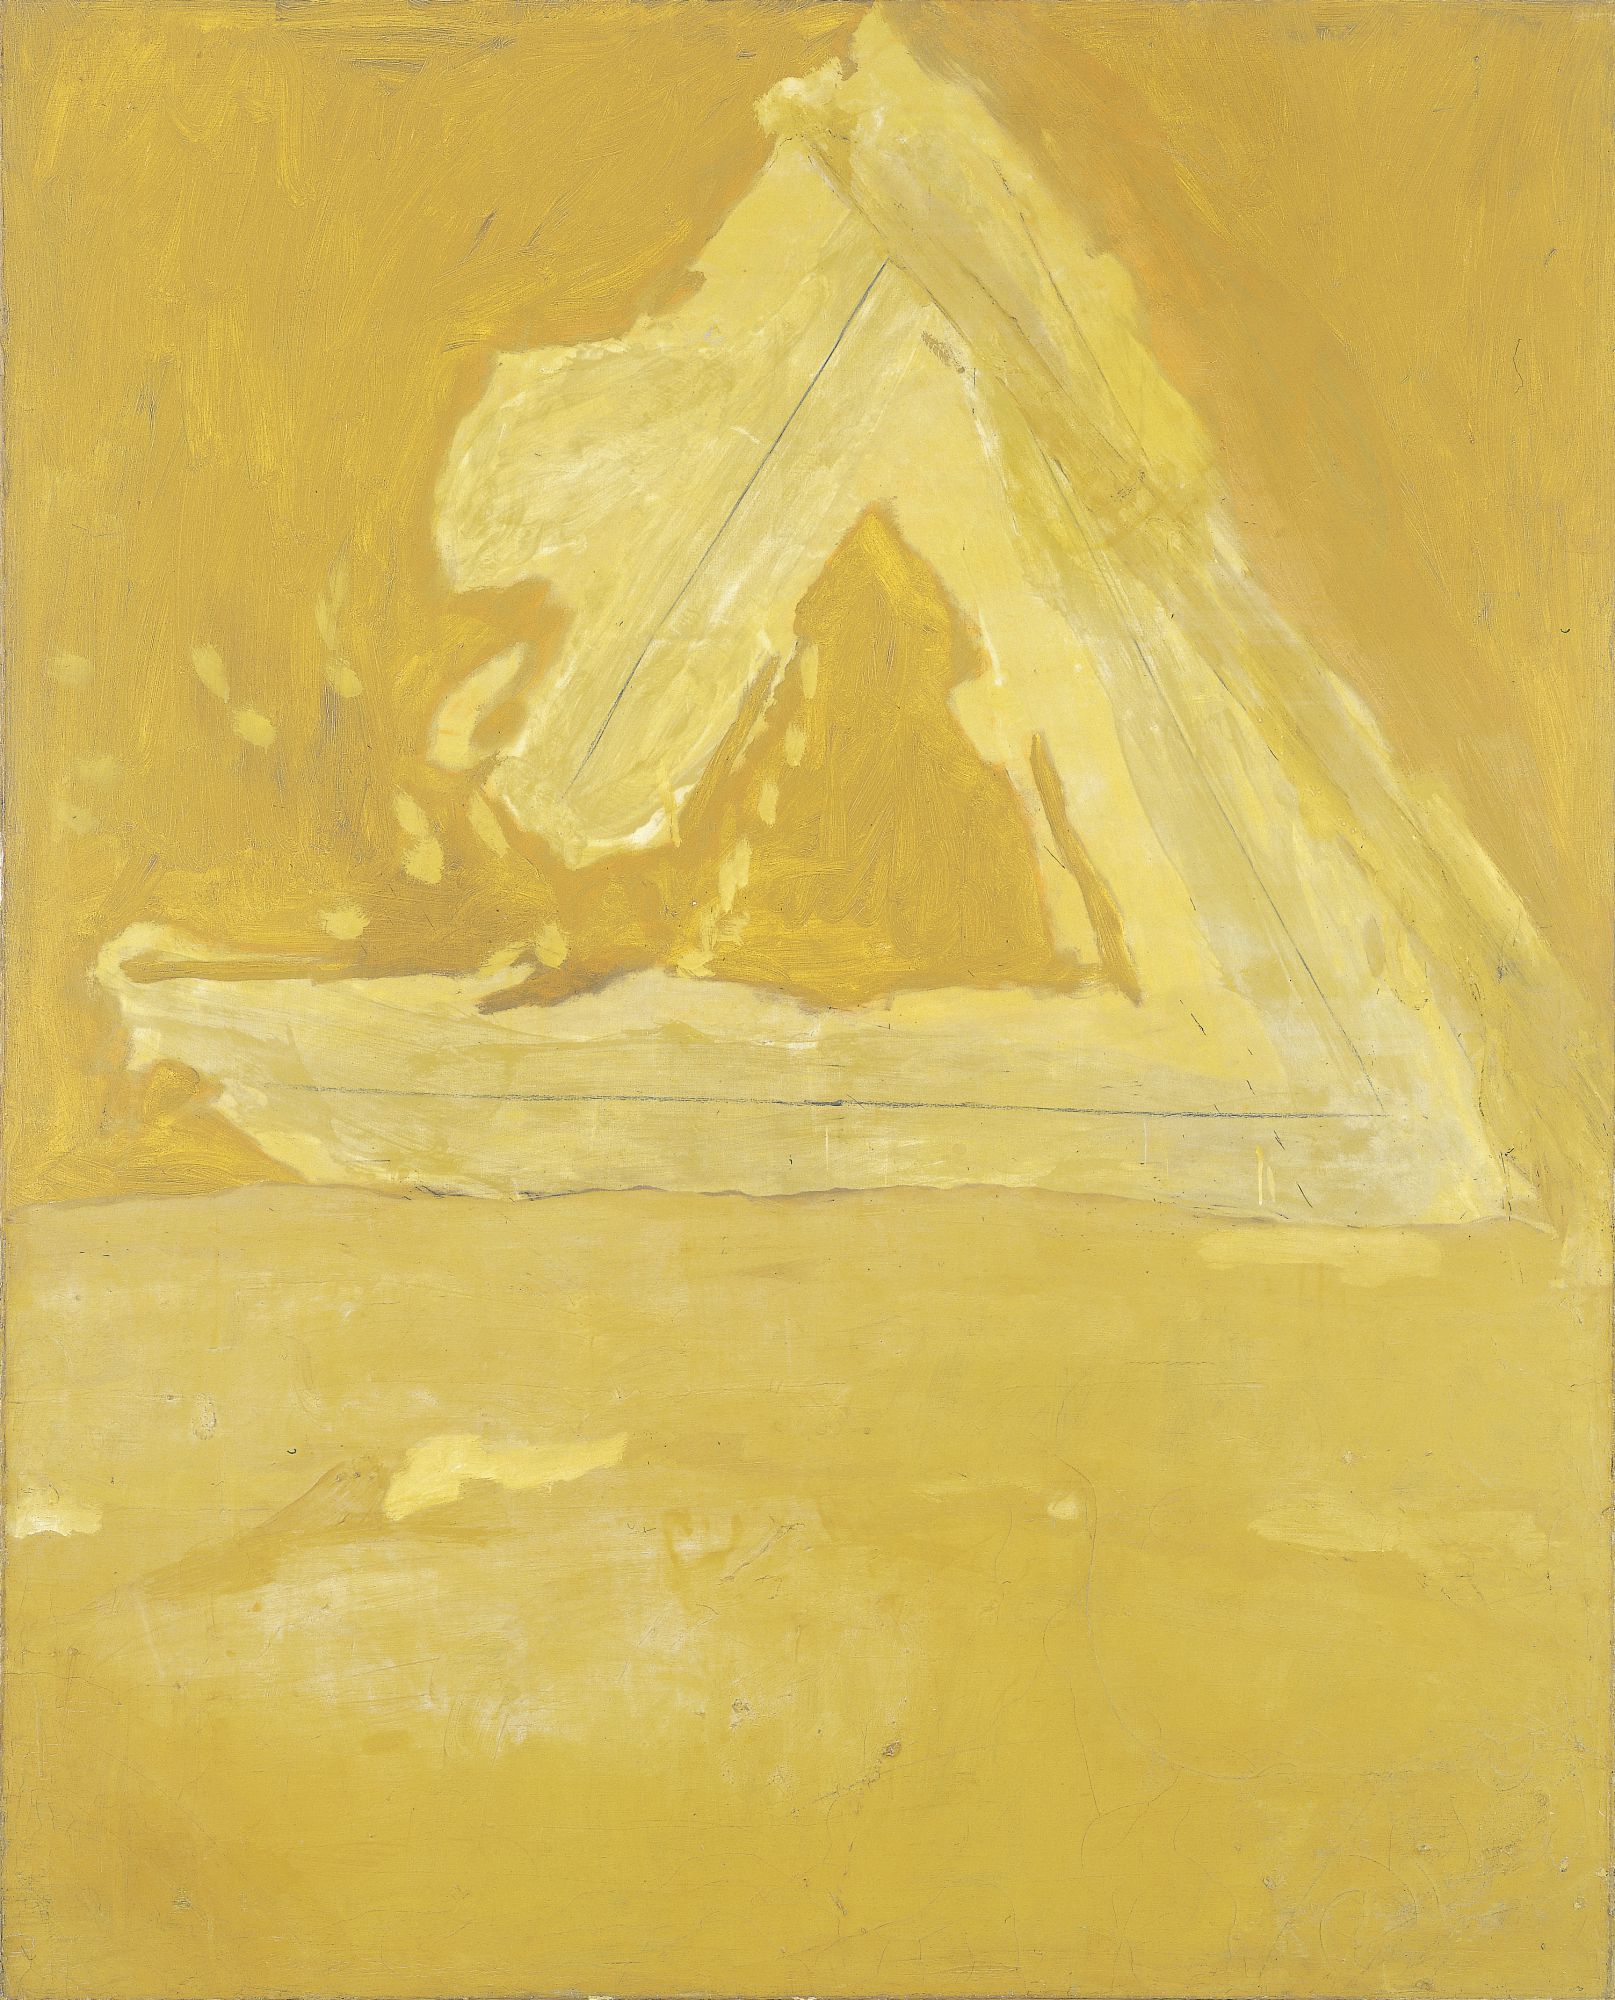 Summertime in Italy No. 7 (In Golden Ochre), 1961. Oil and charcoal on canvas, 85 x 69 inches (215.9 x 175.3 cm)